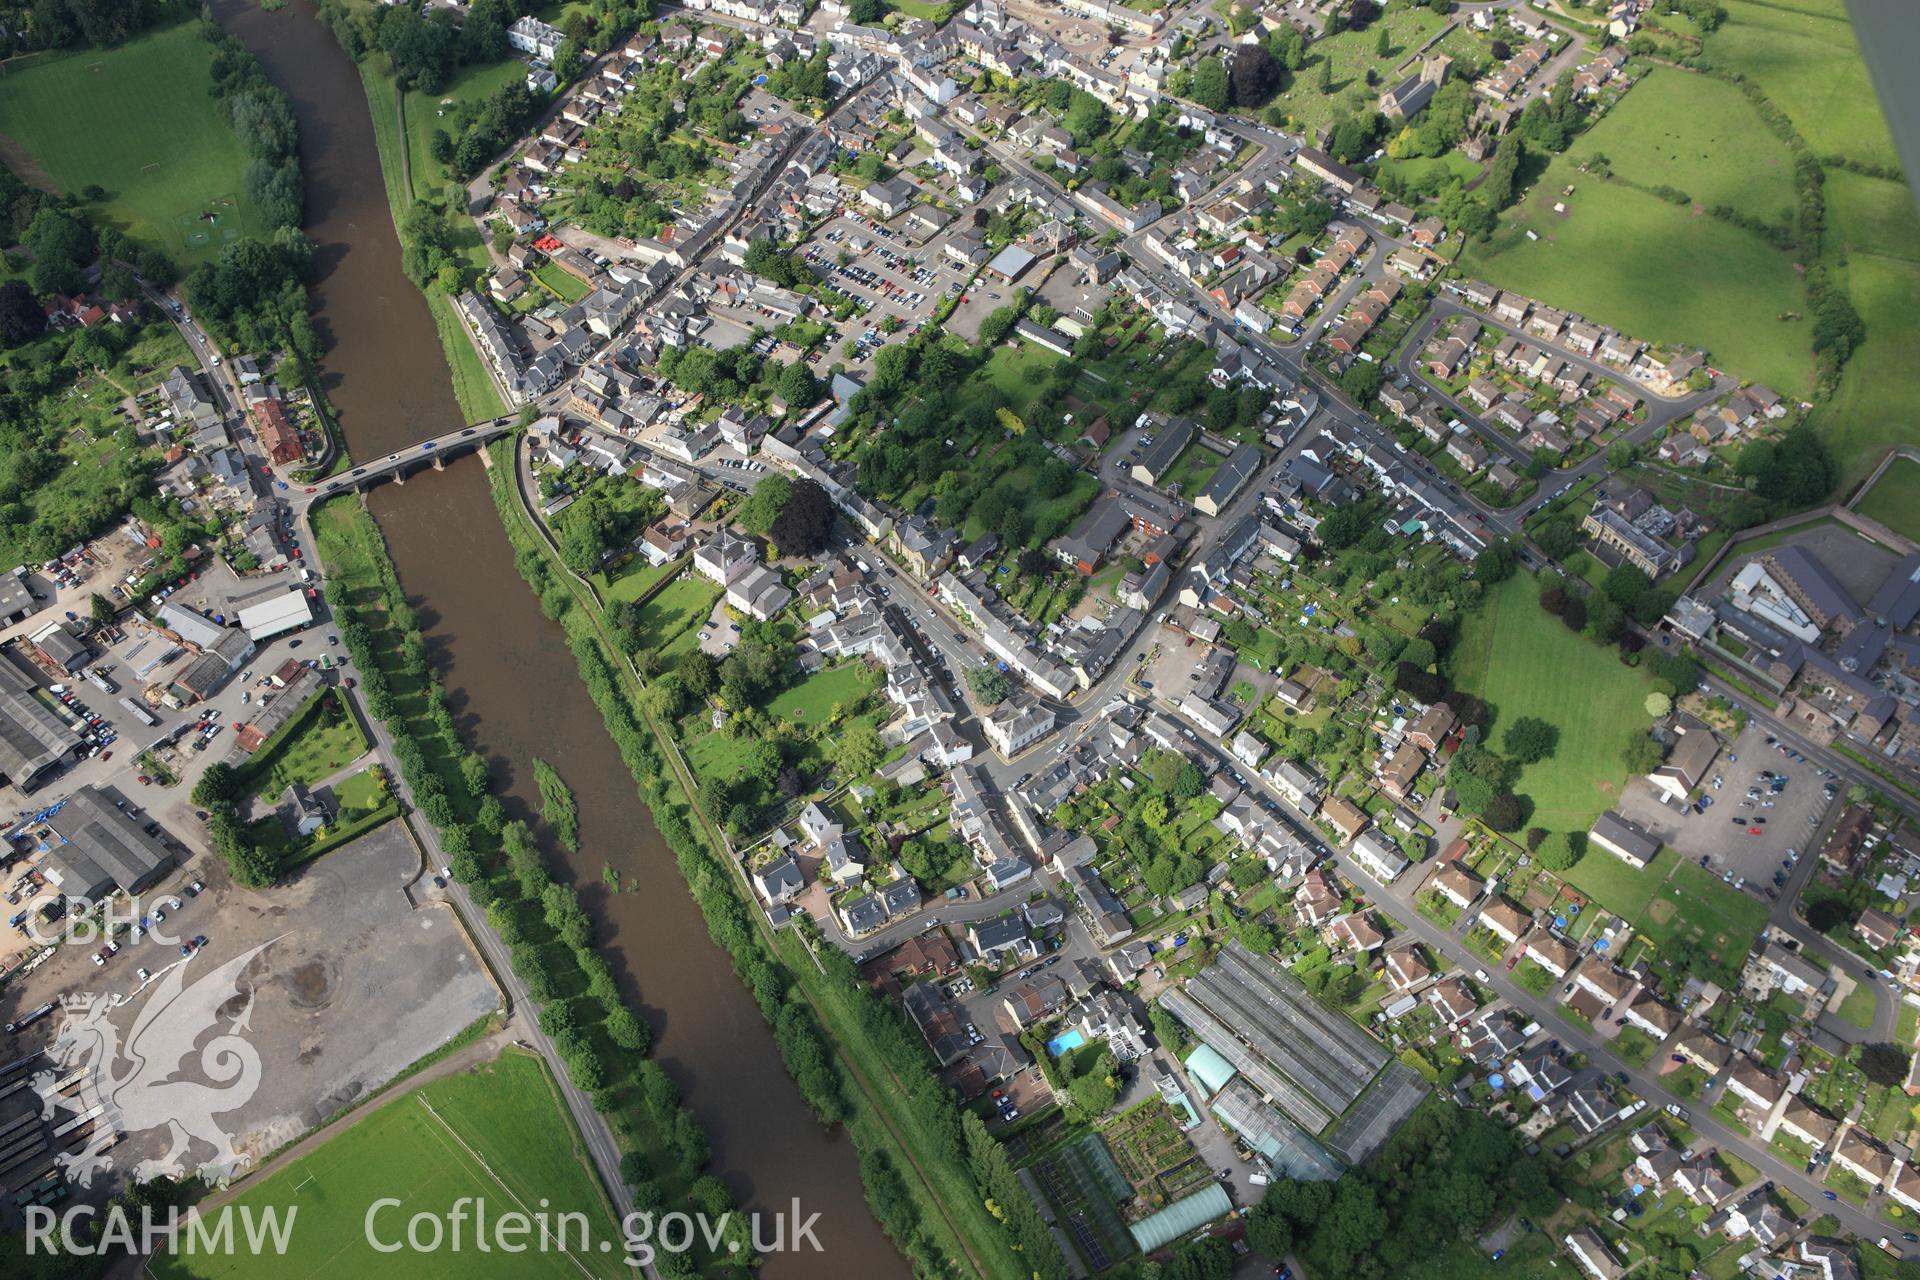 RCAHMW colour oblique aerial photograph of Usk. Taken on 11 June 2009 by Toby Driver